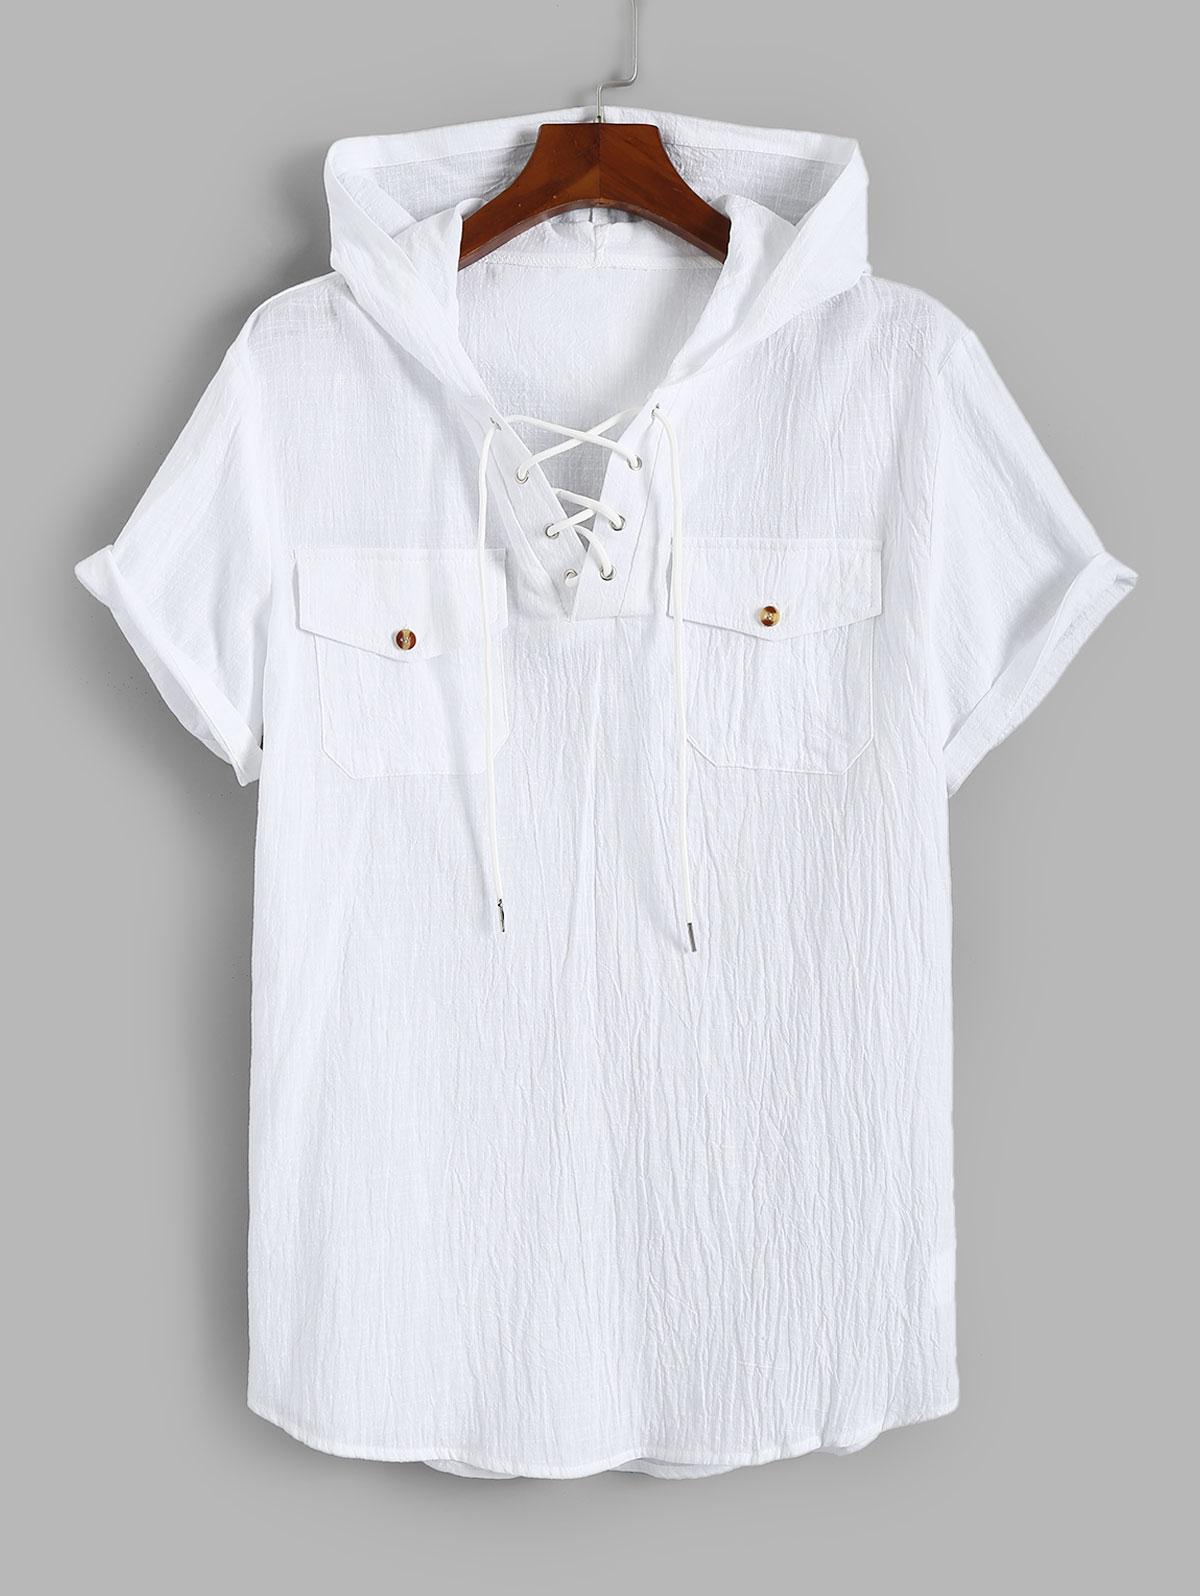 ZAFUL Men's Solid Color Lace Up Pocket Short Sleeve Hooded Shirt Xs White